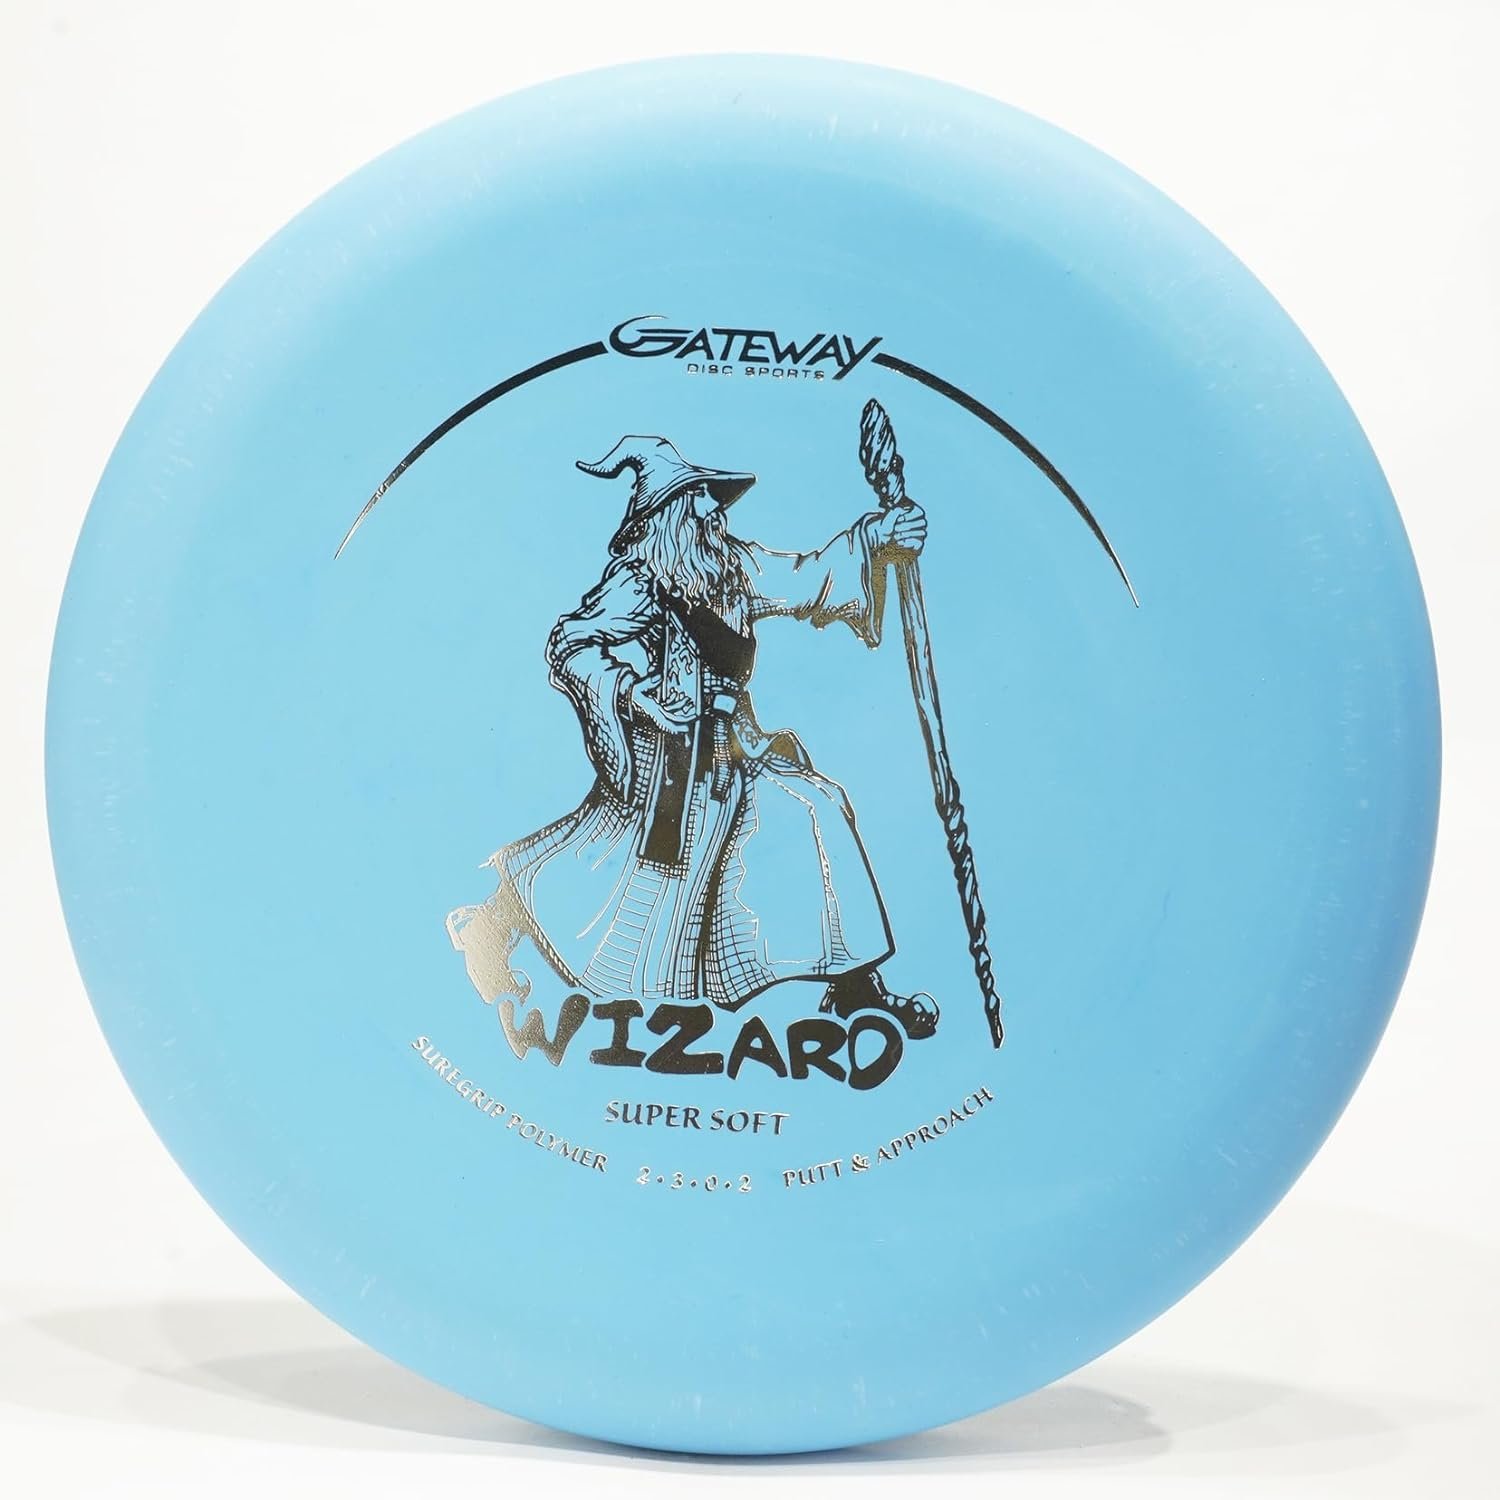 Gateway Super Soft Wizard Disc Golf Putter  Approach Disc, Pick Color/Weight [Stamp  Exact Color May Vary]